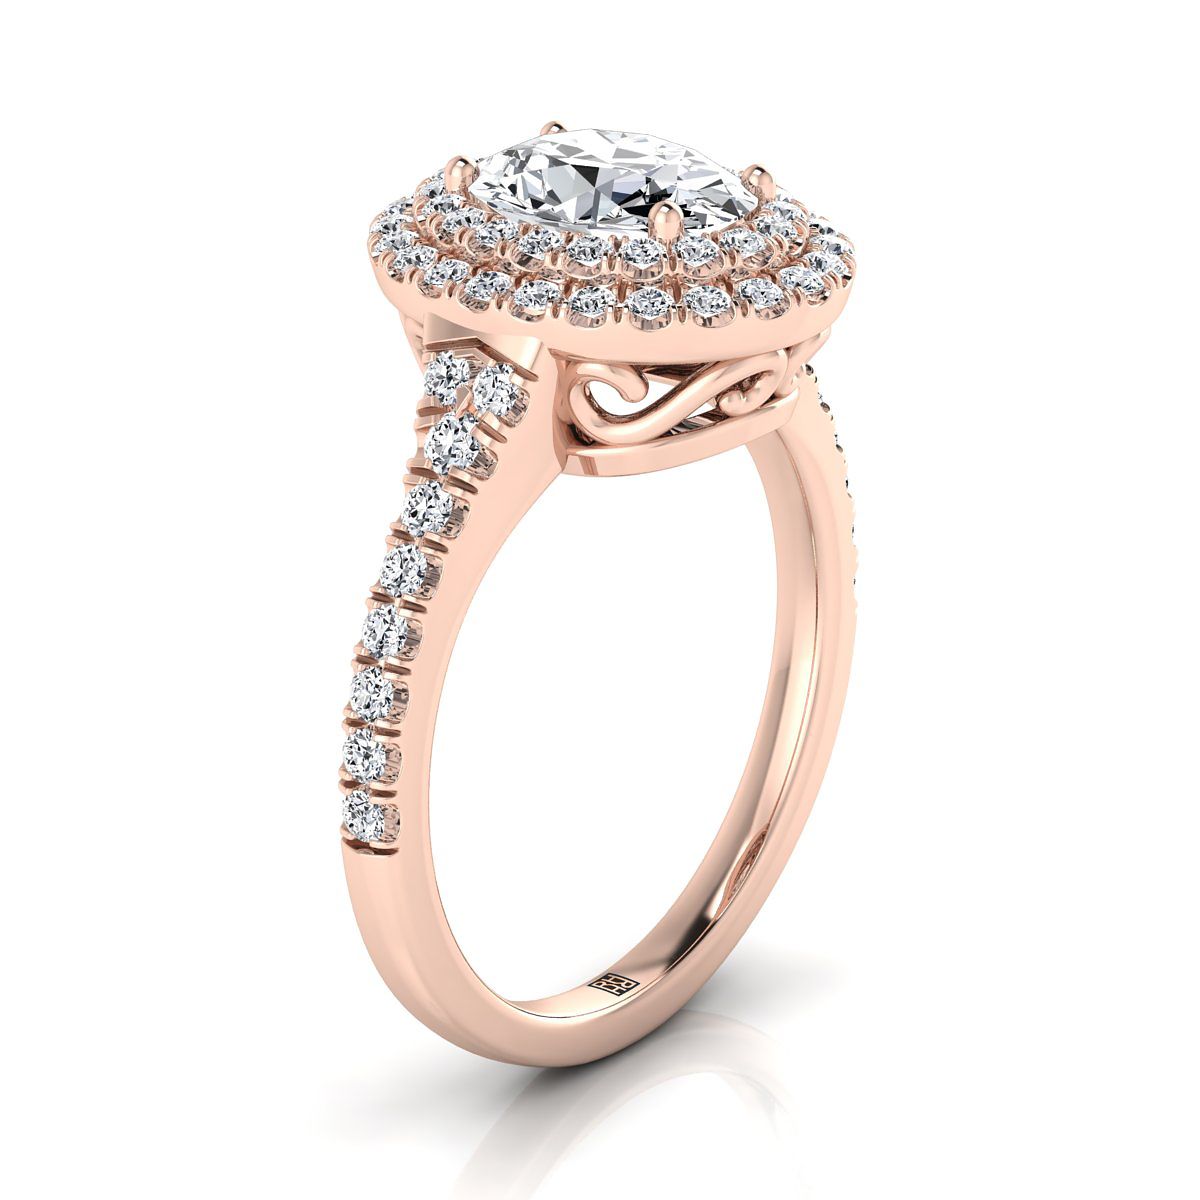 14K Rose Gold Oval Pink Sapphire Double Halo with Scalloped Pavé Diamond Engagement Ring -1/2ctw